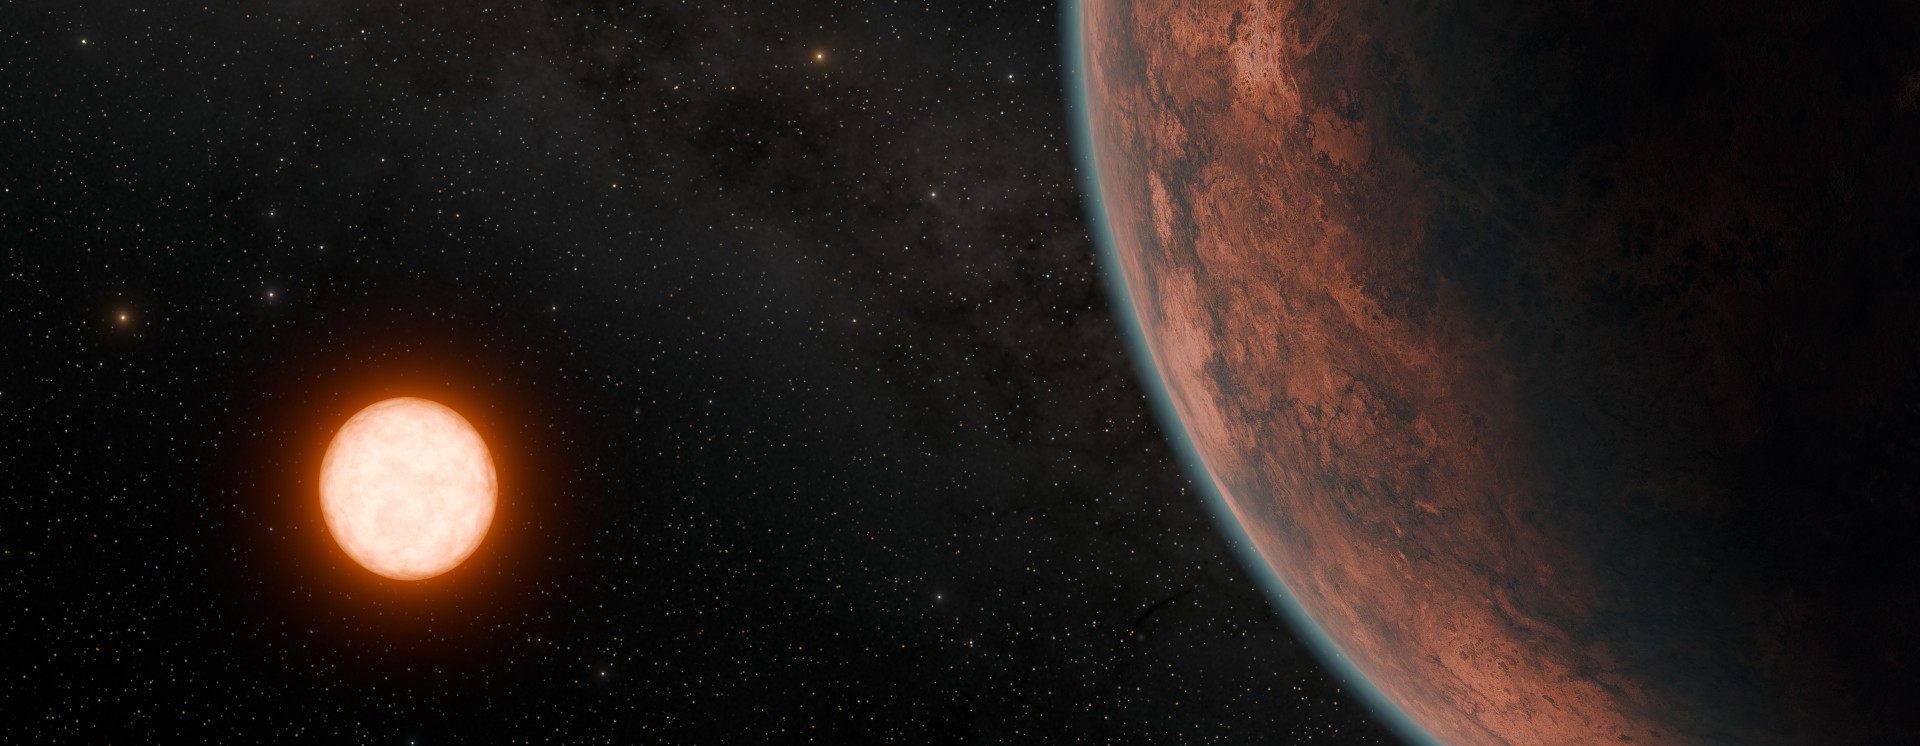 Illustration of an exoplanet in close up, with red dwarf star in the background